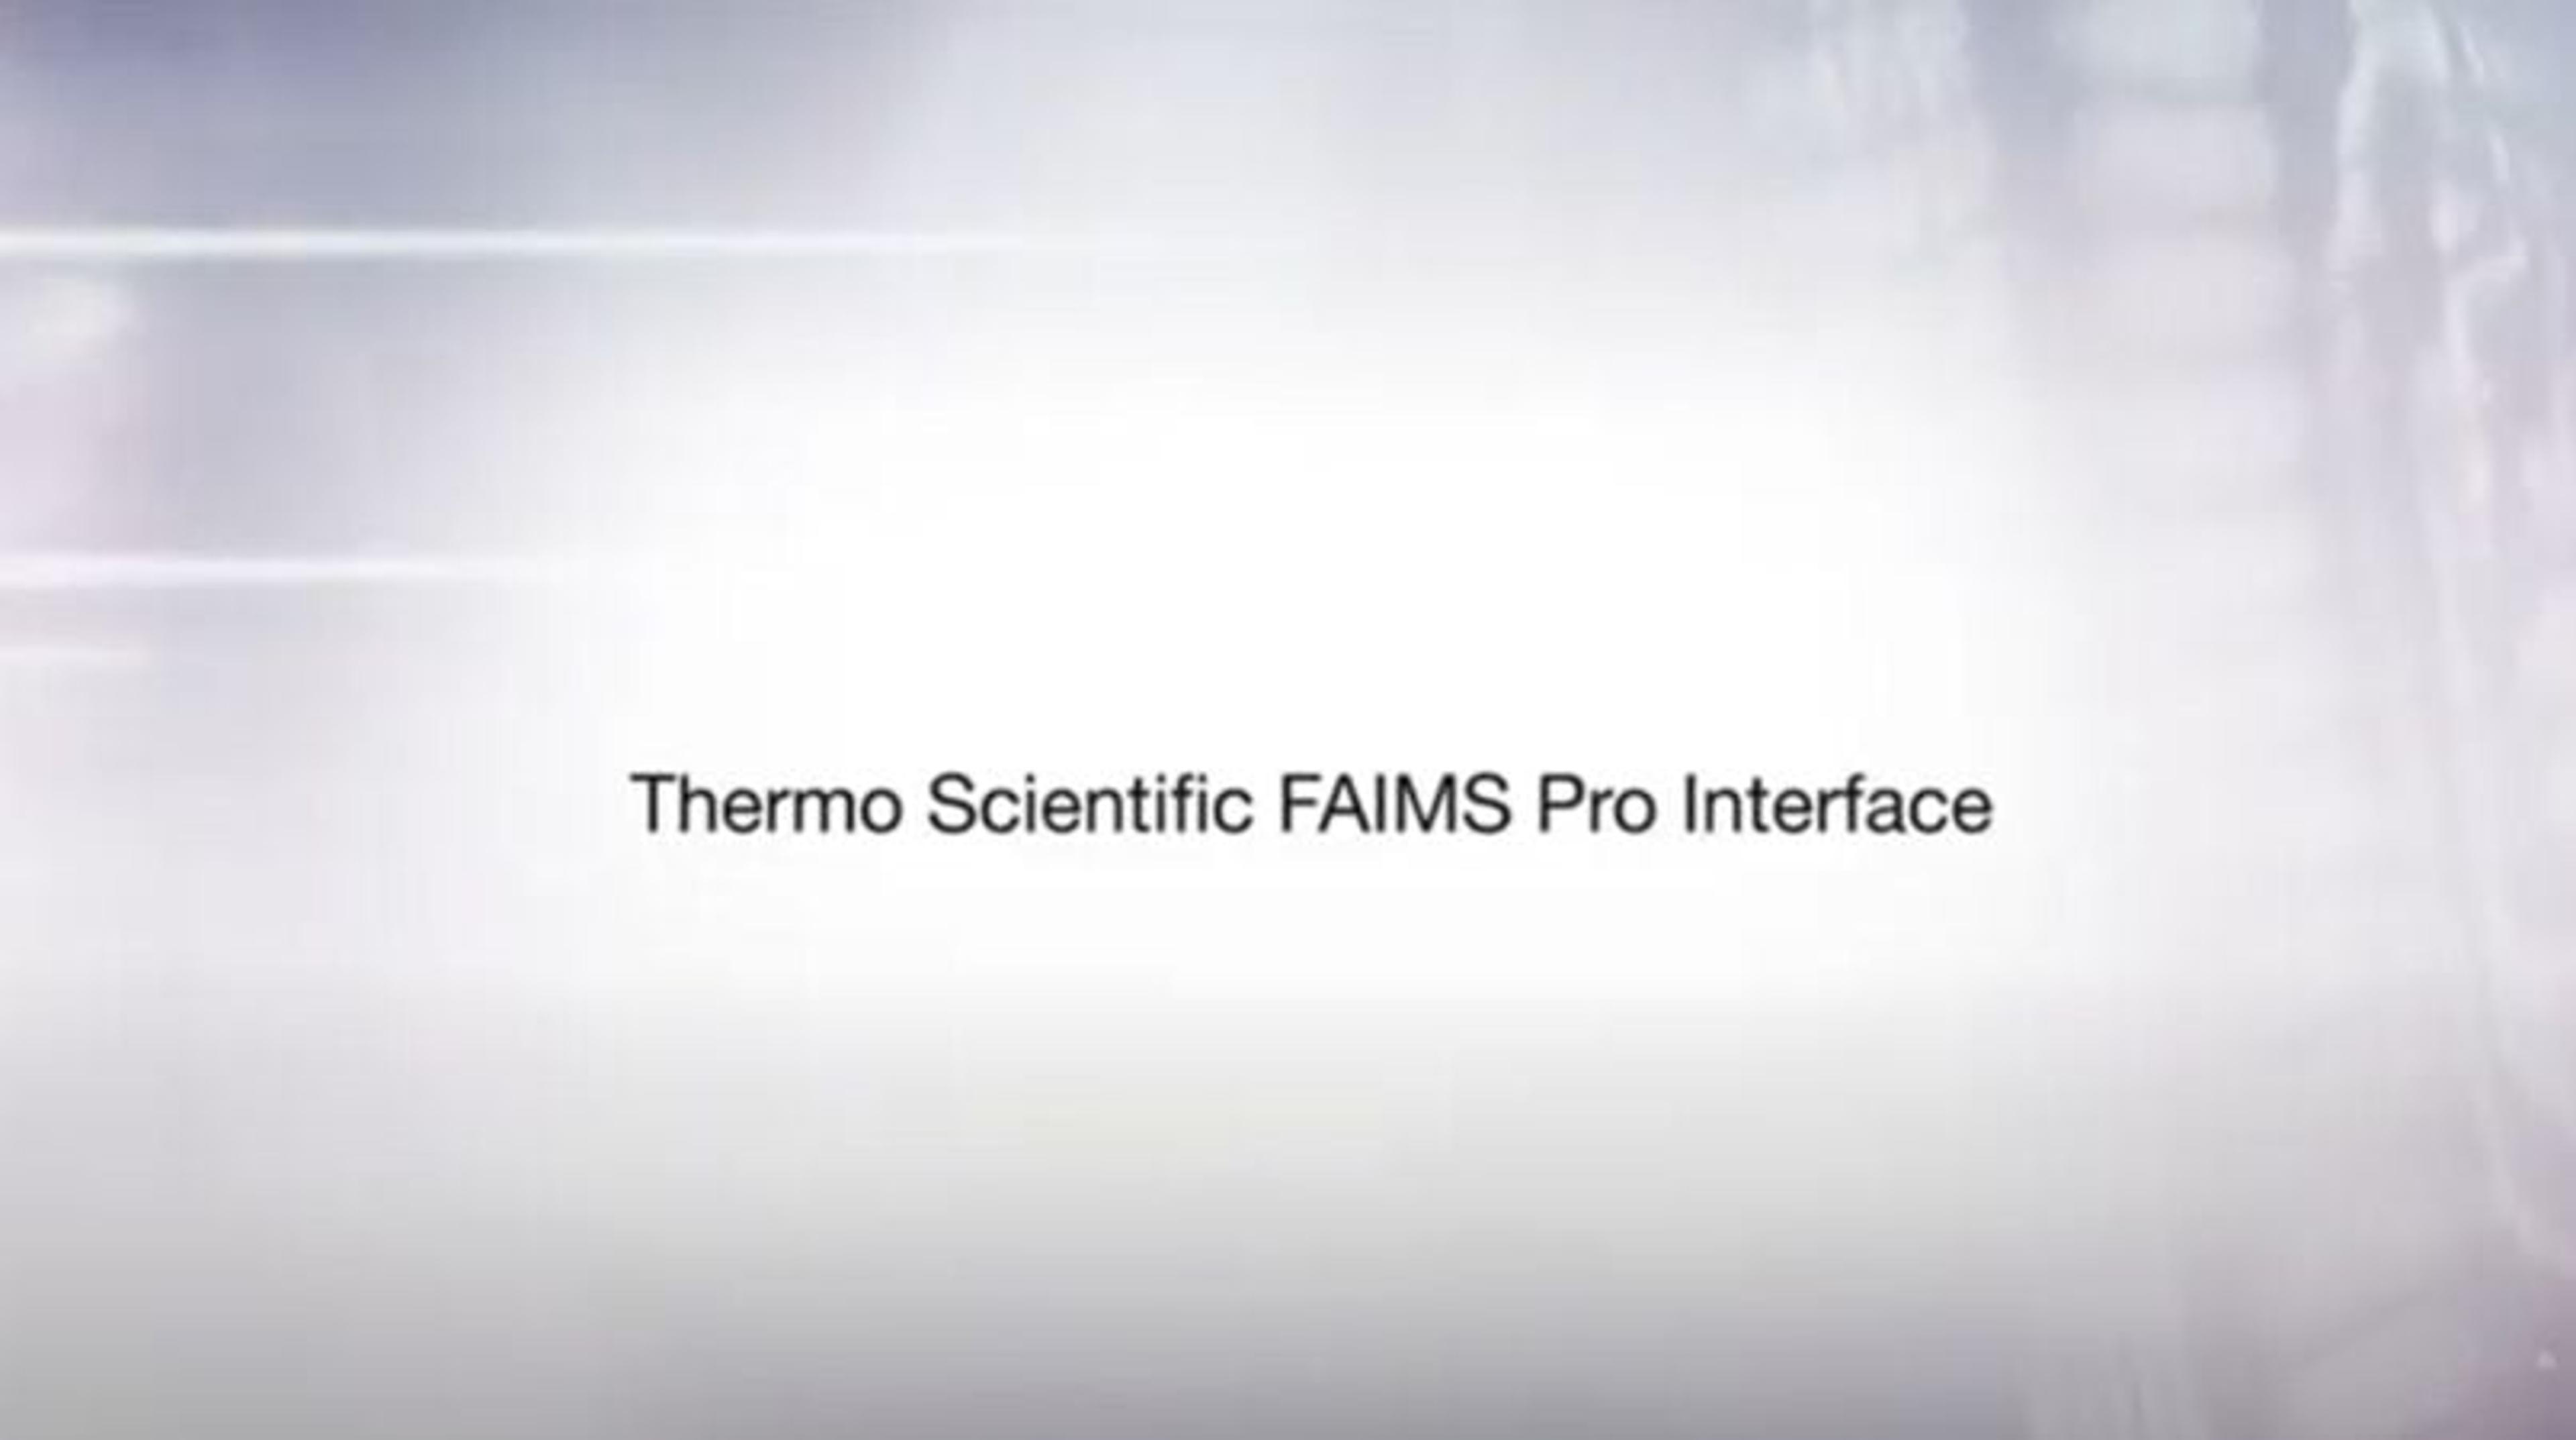 FAIMS Pro Interface: See how it works